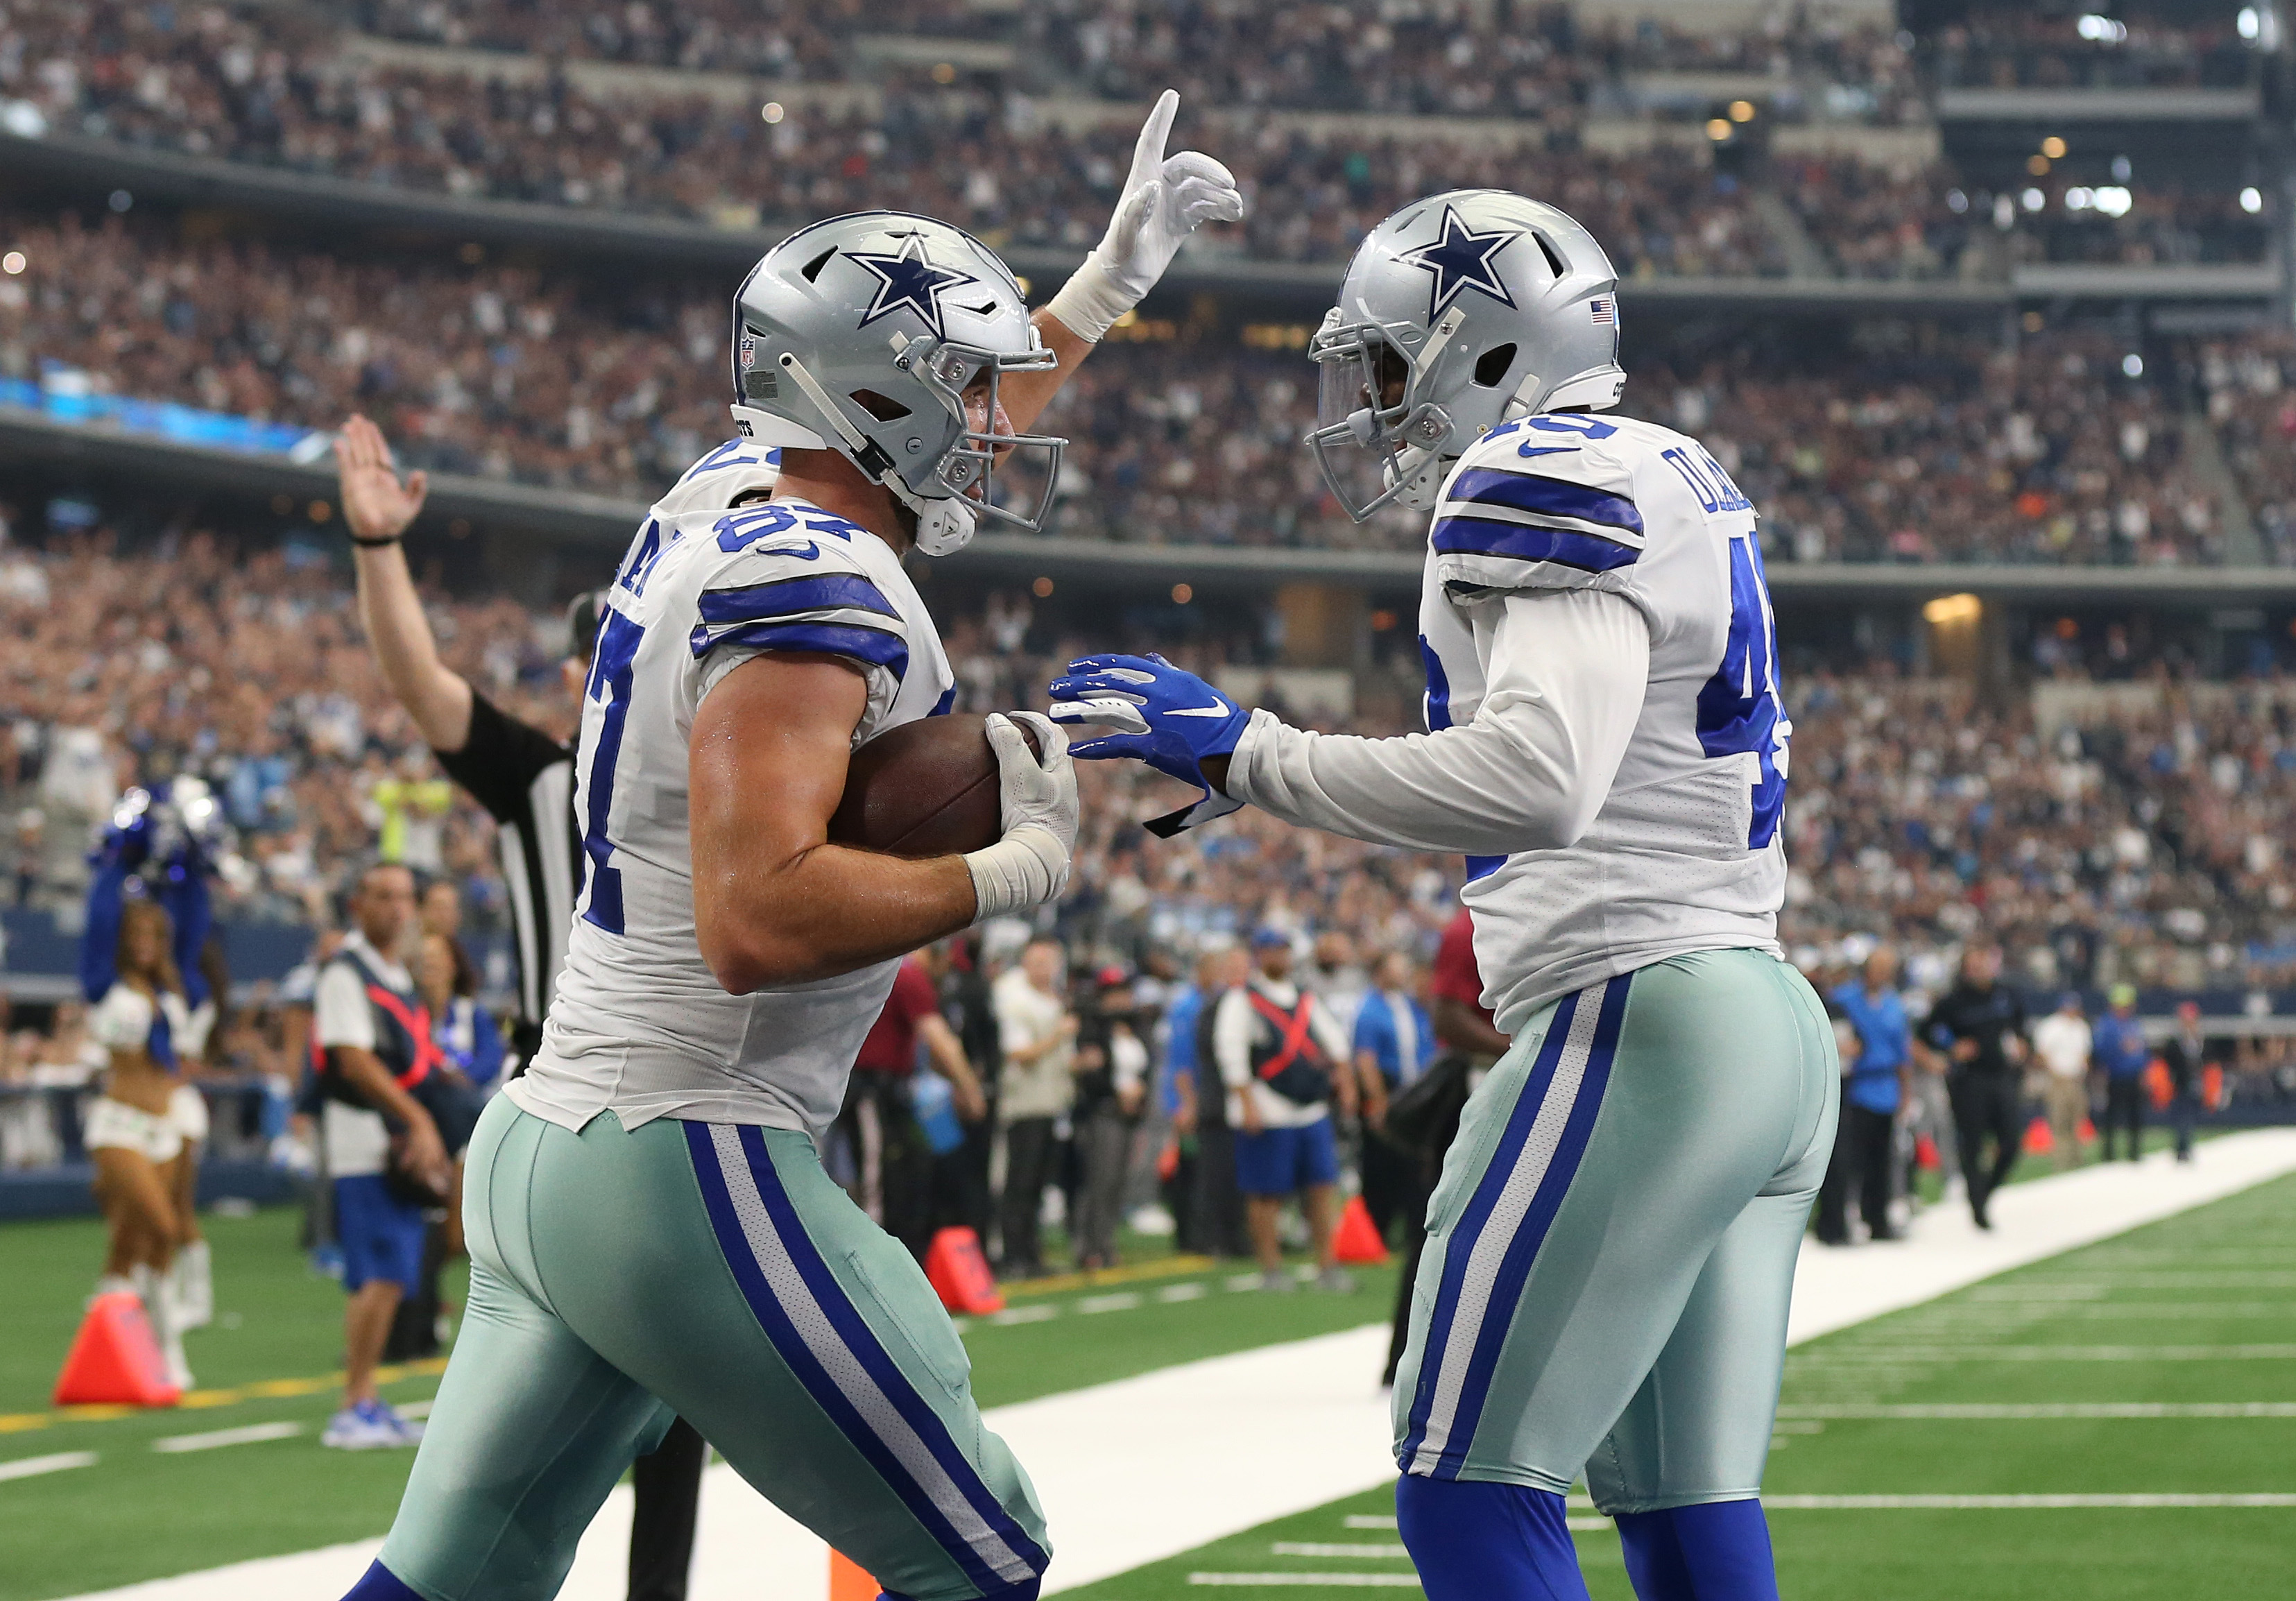 PHOTOS: Cowboys get back to winning ways with 26-24 victory over the Lions